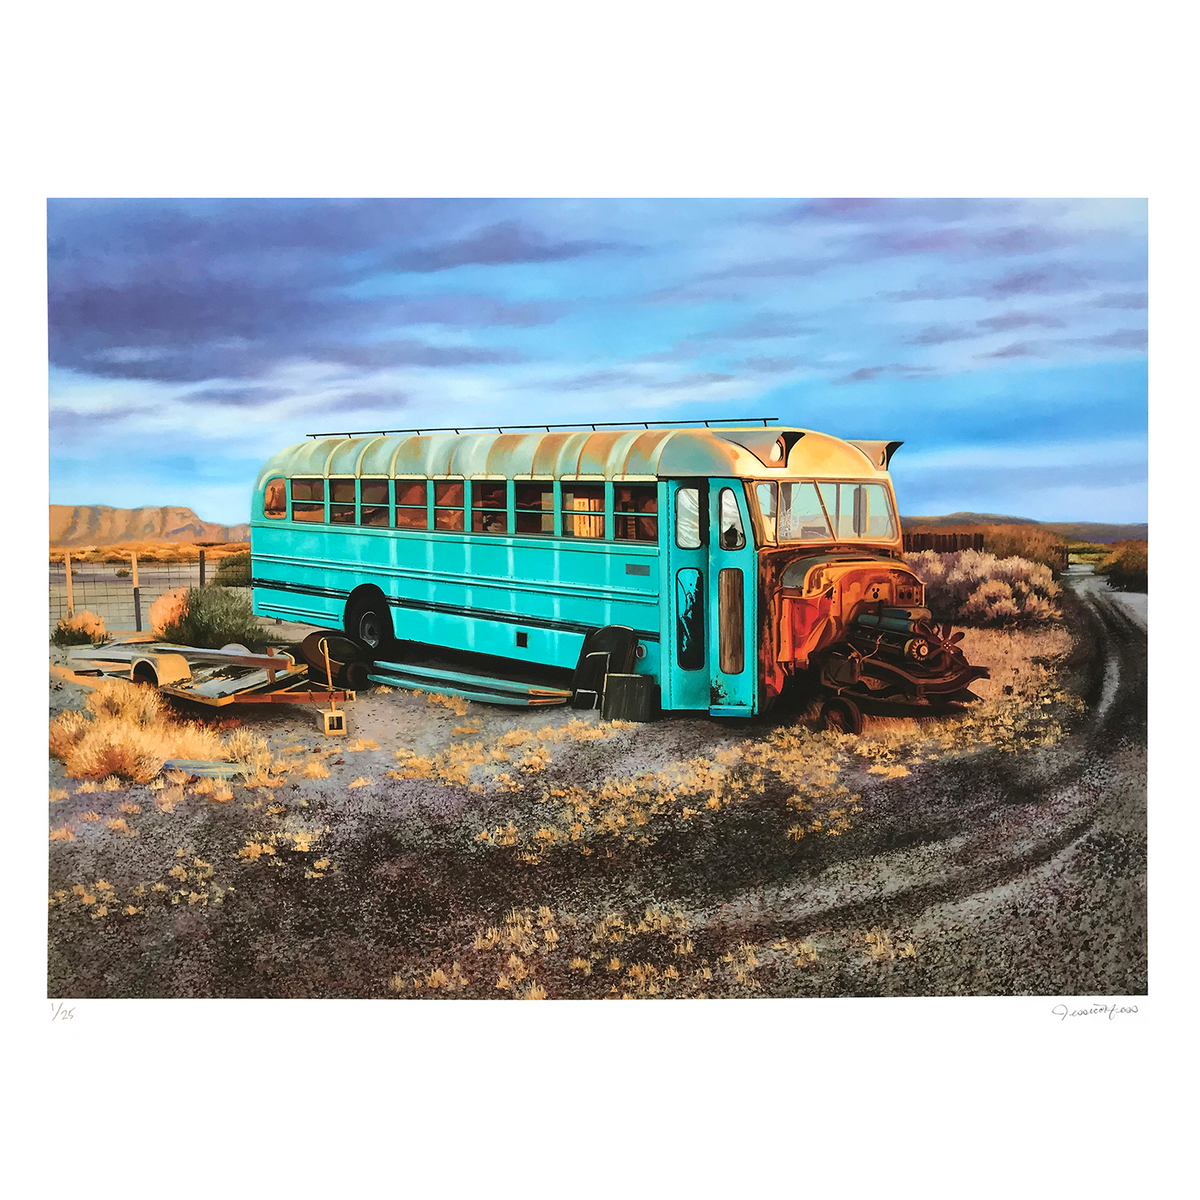 Jessica Hess &quot;Last Stop&quot; - Archival Print, Limited Edition of 25 - 18 x 24&quot;